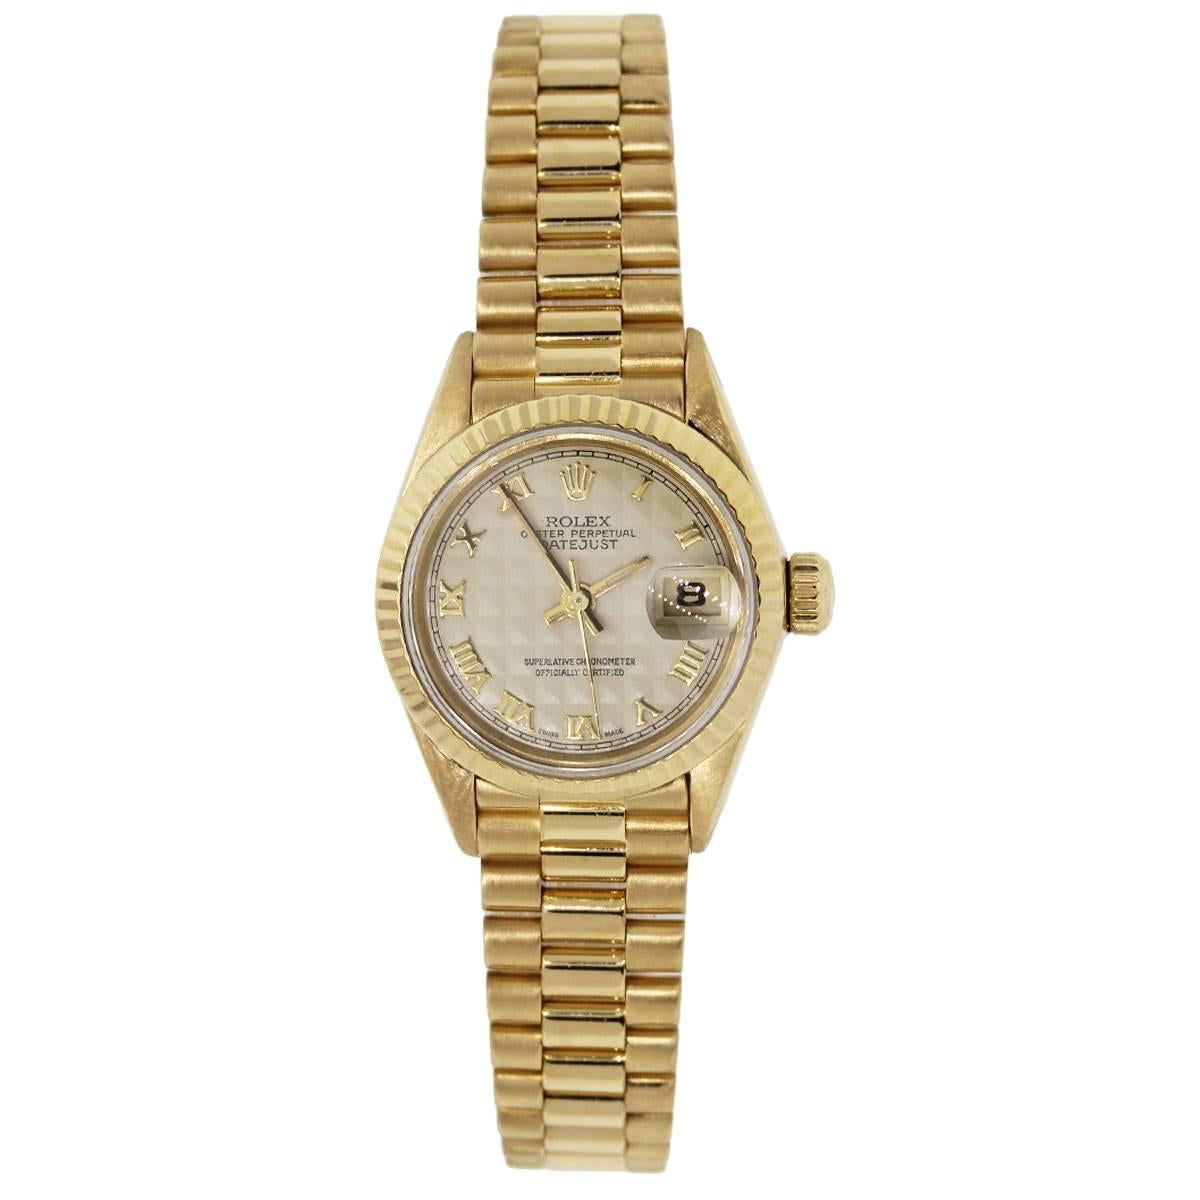 Brand: Rolex
MPN: 69178
Model: Presidential
Serial: “W” serial
Case Material: 18k yellow gold
Case Diameter: 26mm
Crystal: Scratch resistant sapphire
Bezel: 18k yellow gold fluted bezel
Dial: Ivory color pyramid dial with date window at the 3